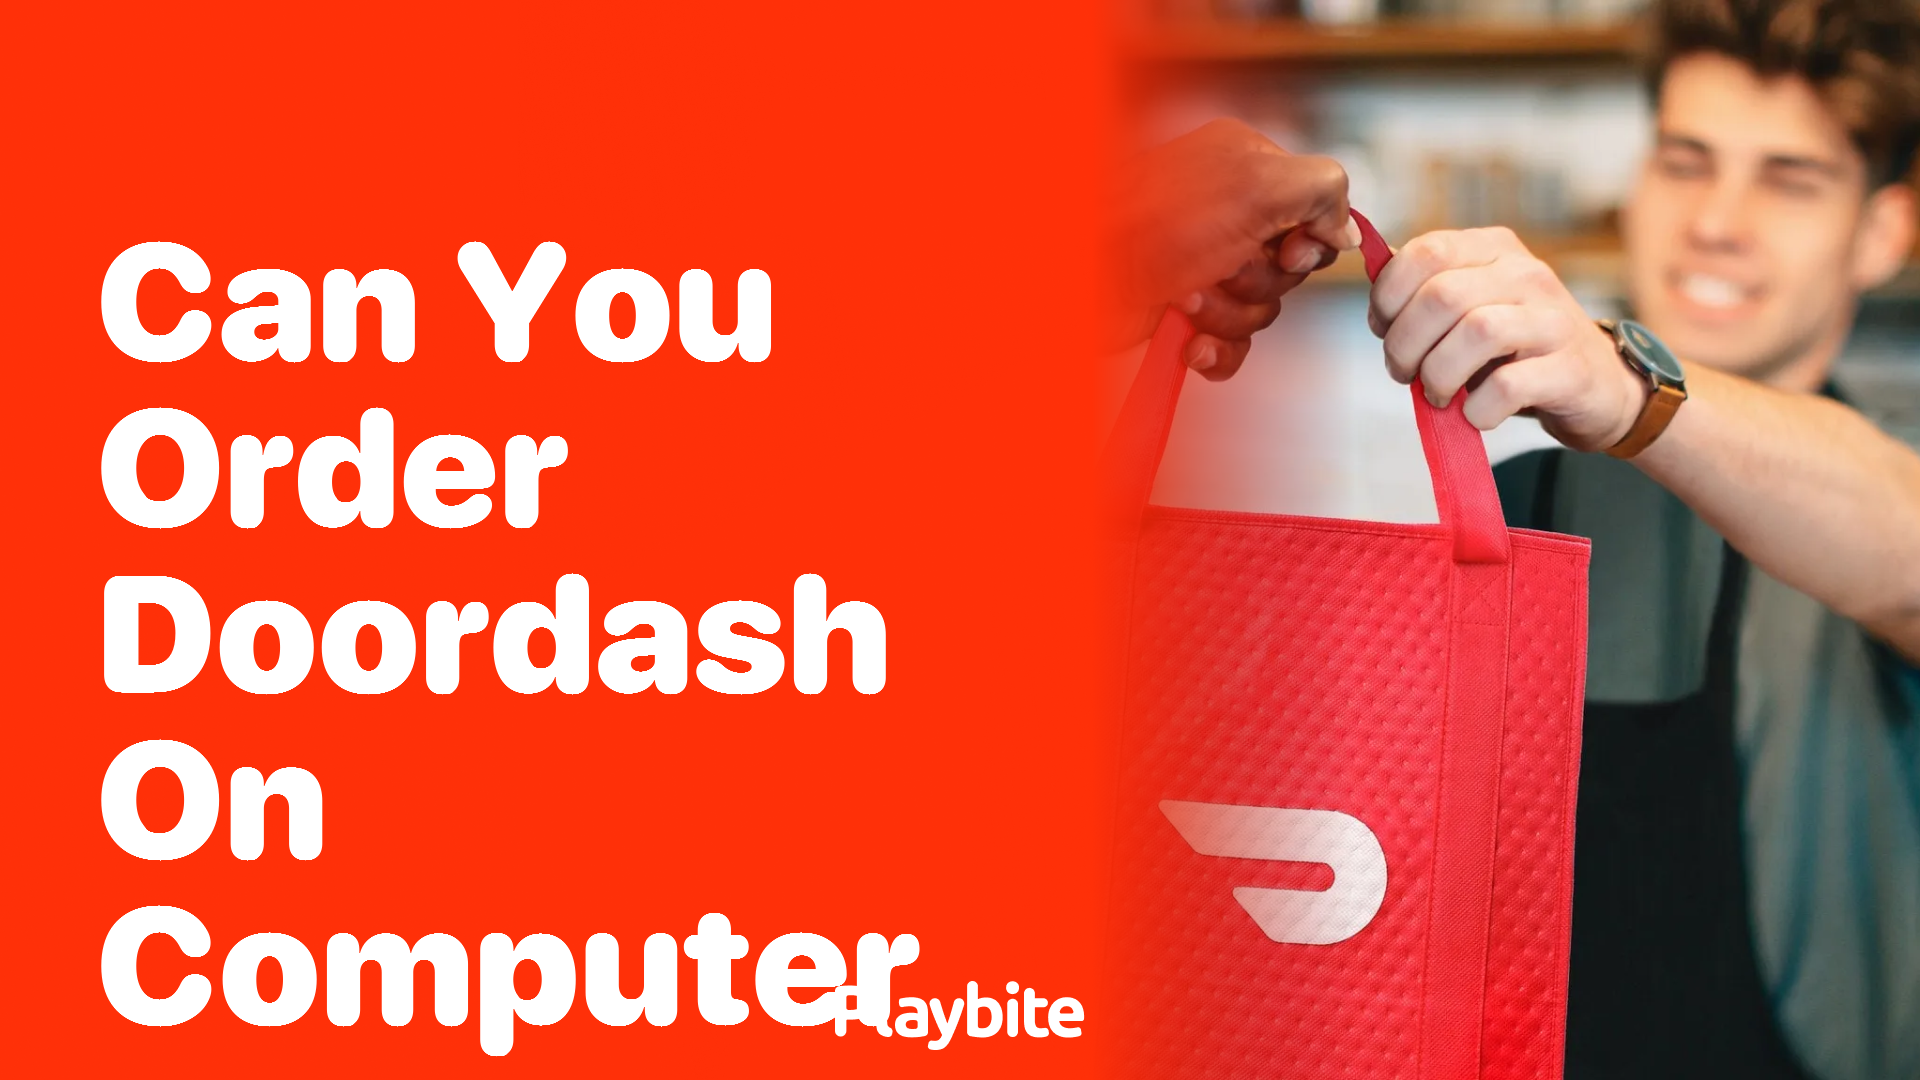 Can You Order DoorDash on Your Computer?